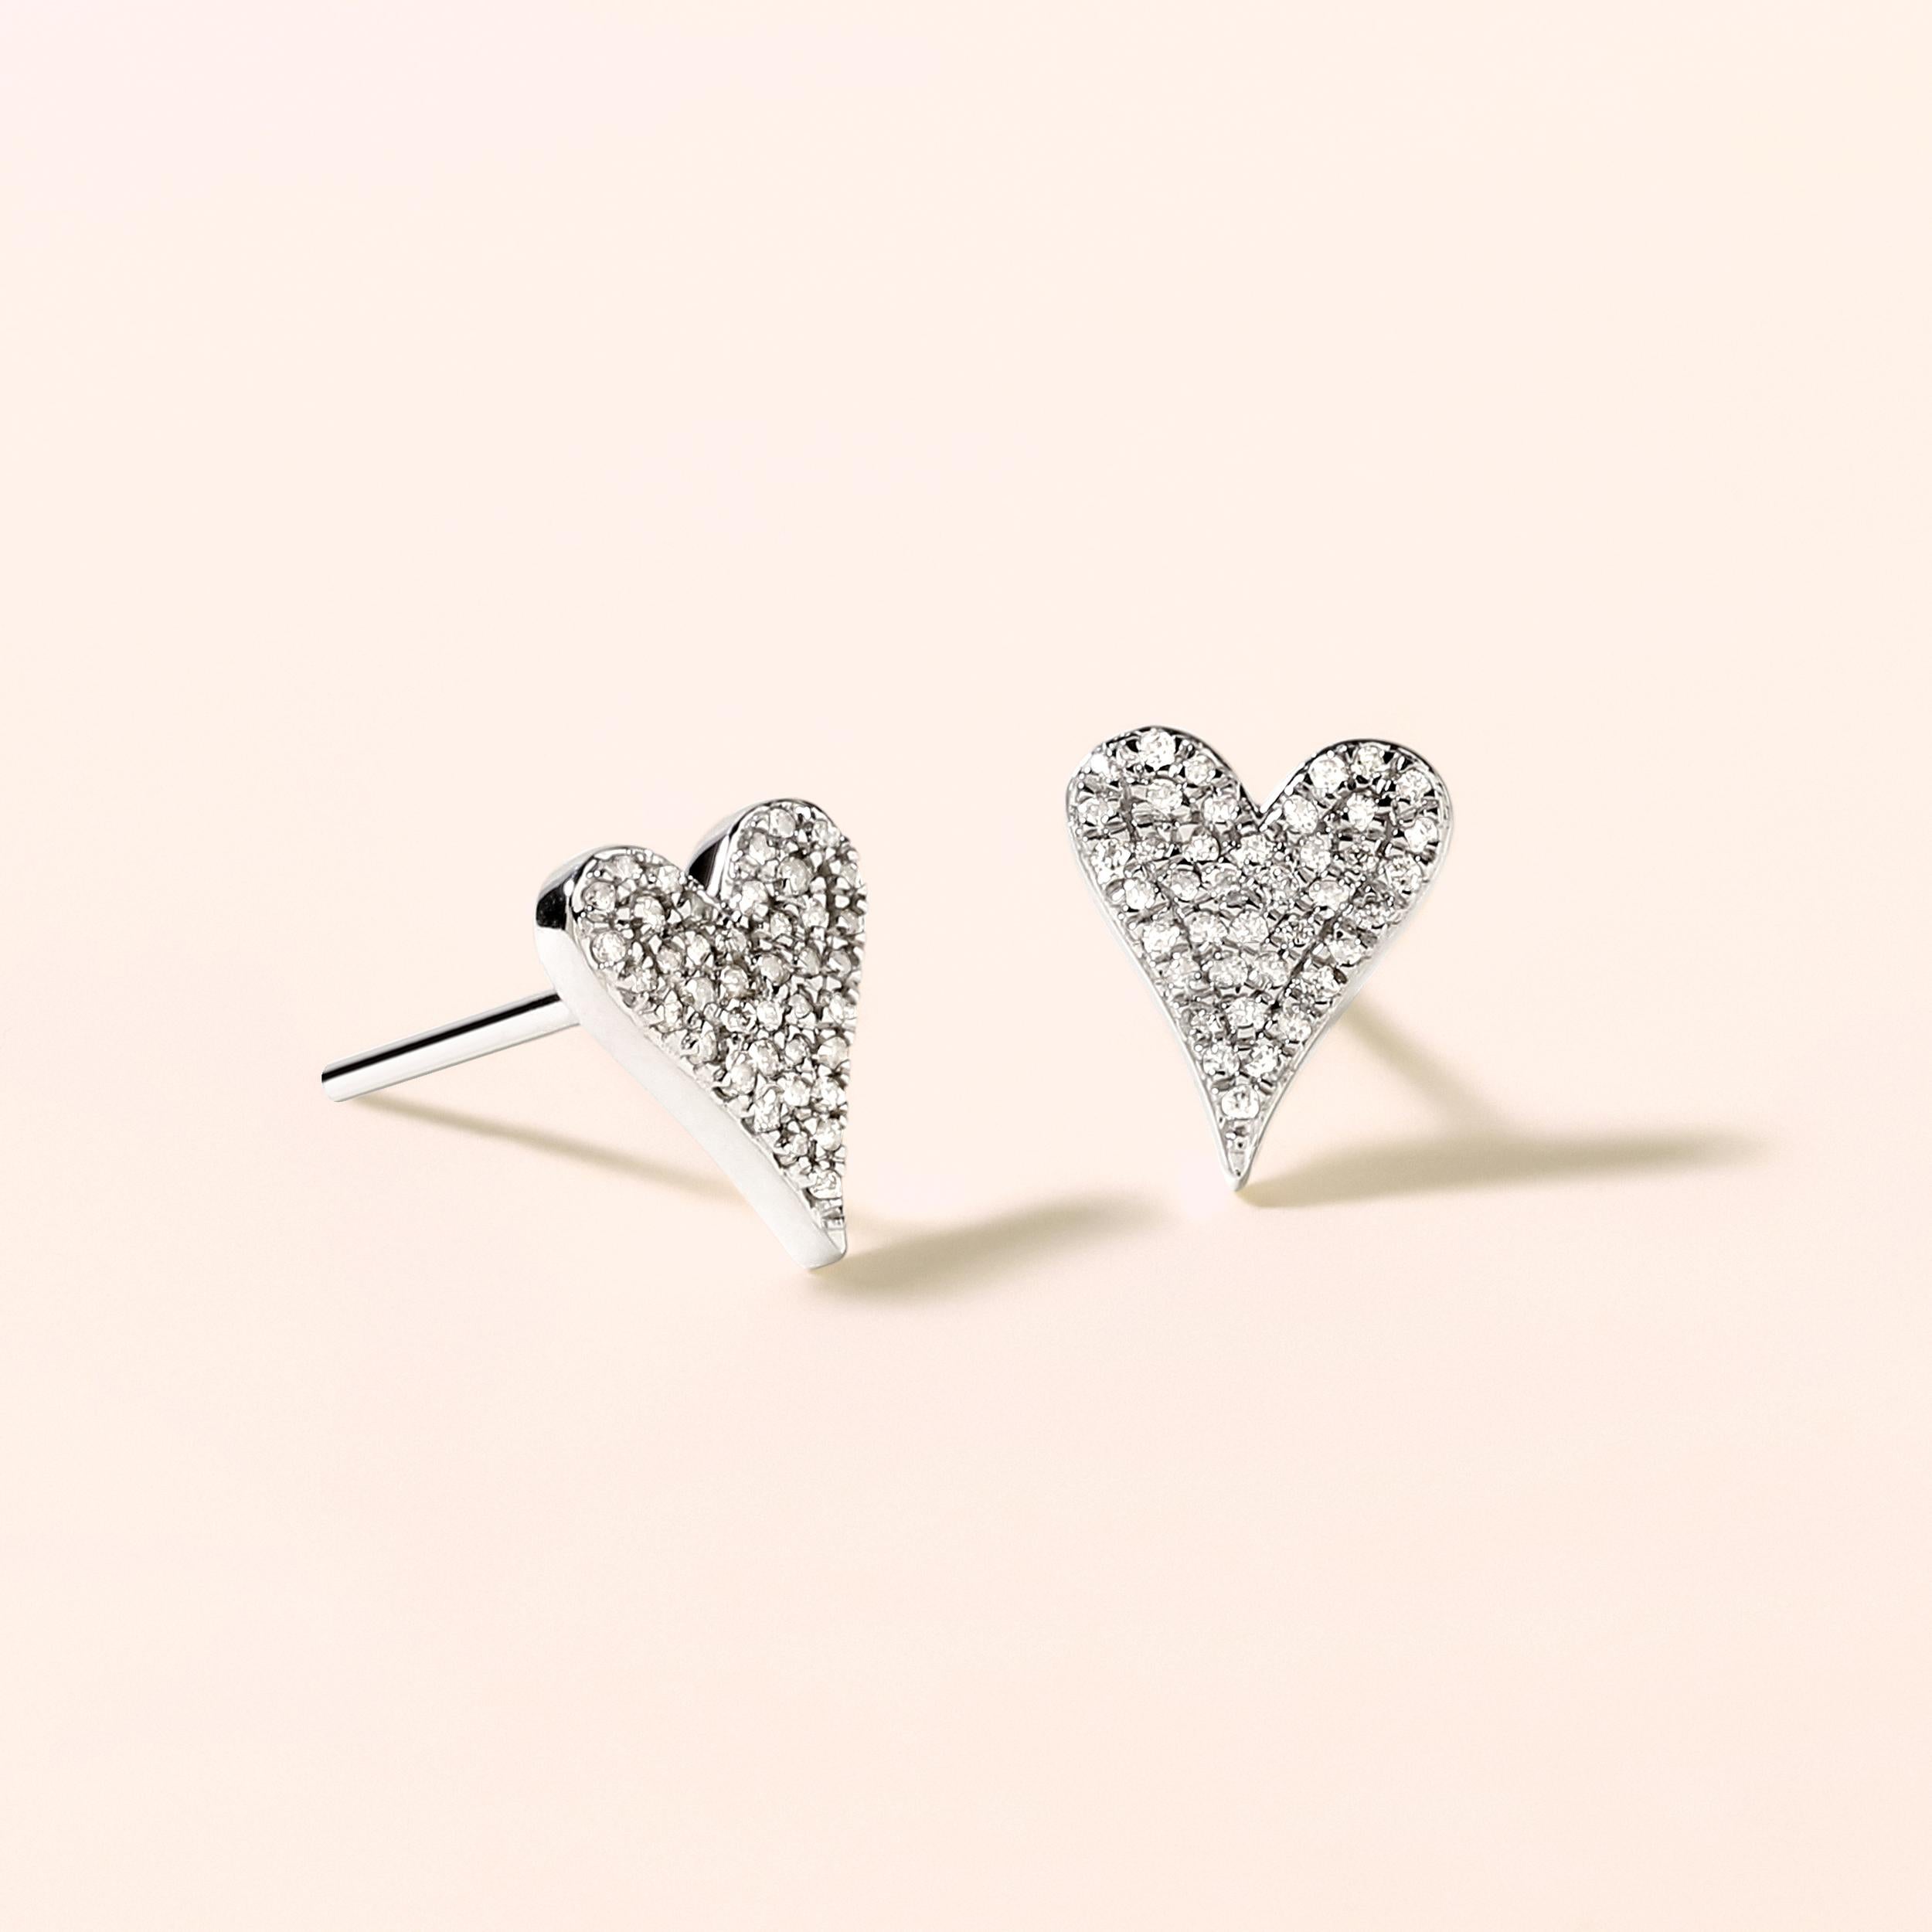 Crafted in 1.58 grams of 14K White Gold, the earrings contains 80 stones of Round Diamonds with a total of 0.15 carat in G-H color and SI clarity.

This jewelry piece will be expertly crafted by our skilled artisans upon order. Allow us a shipping